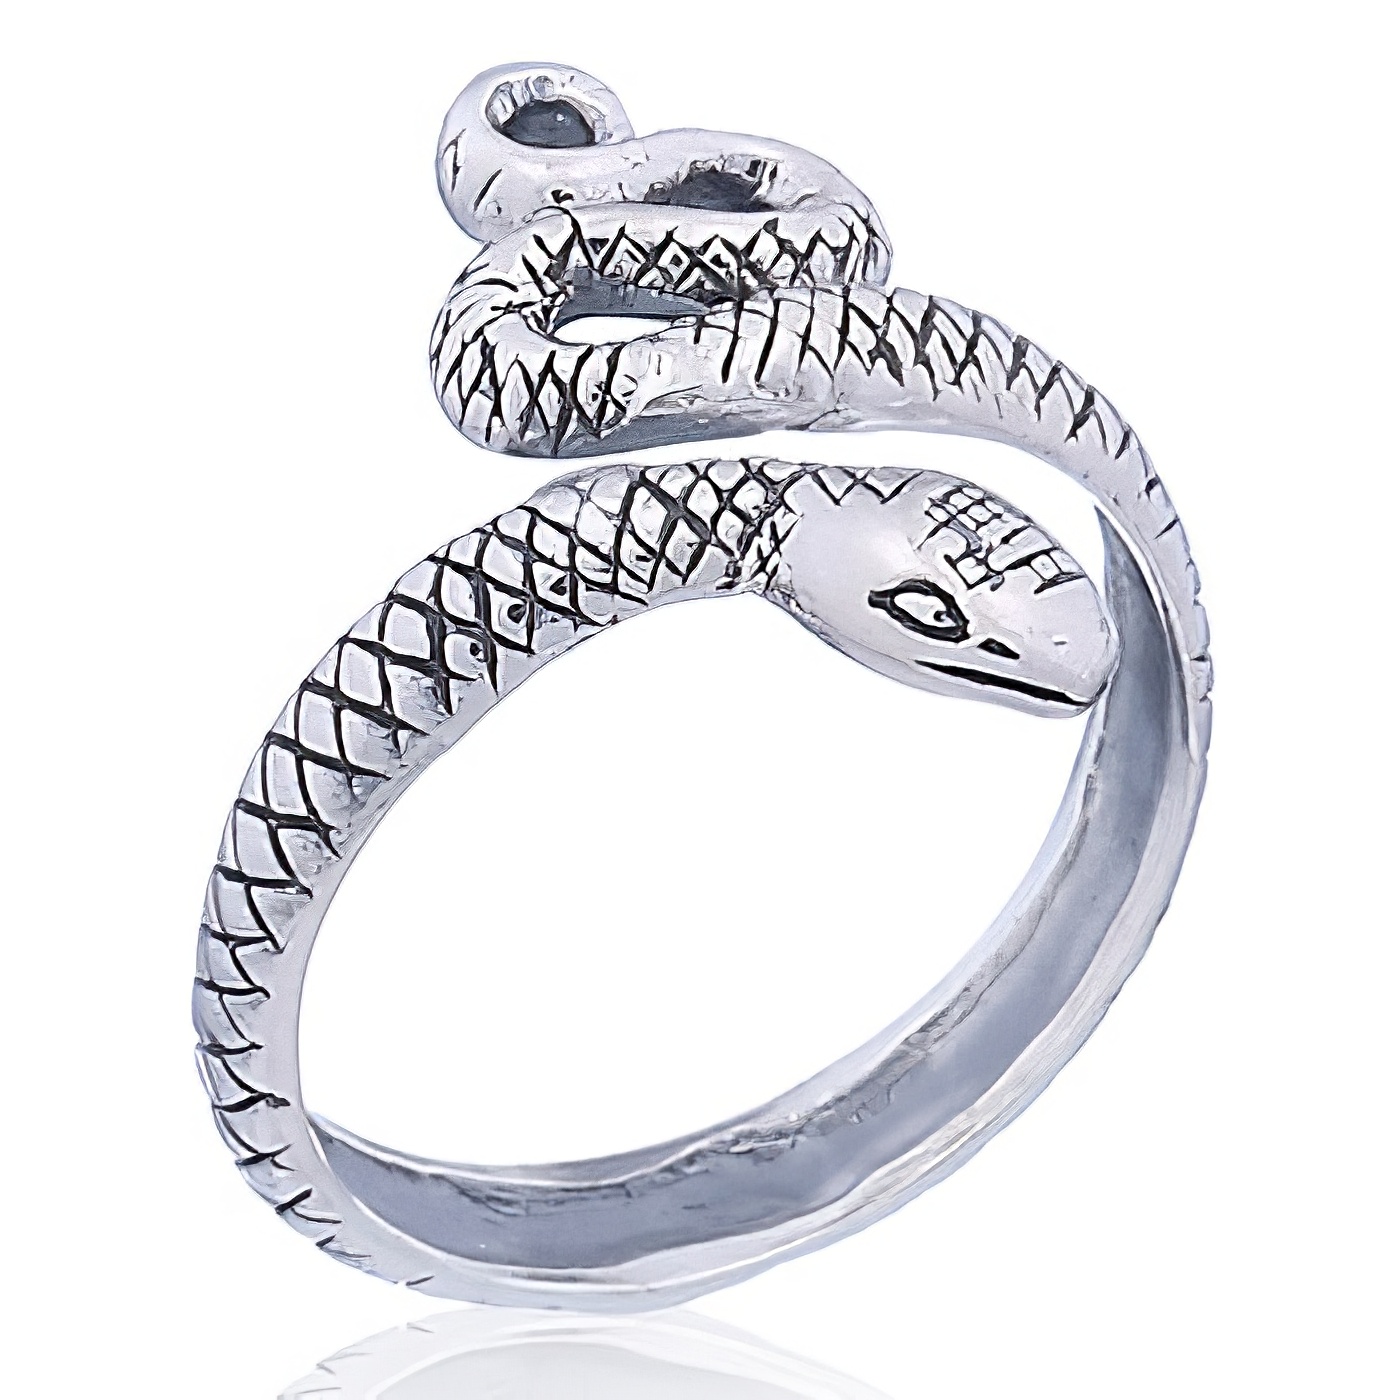 Snake Toe Ring in Antiqued Sterling Silver by BeYindi 